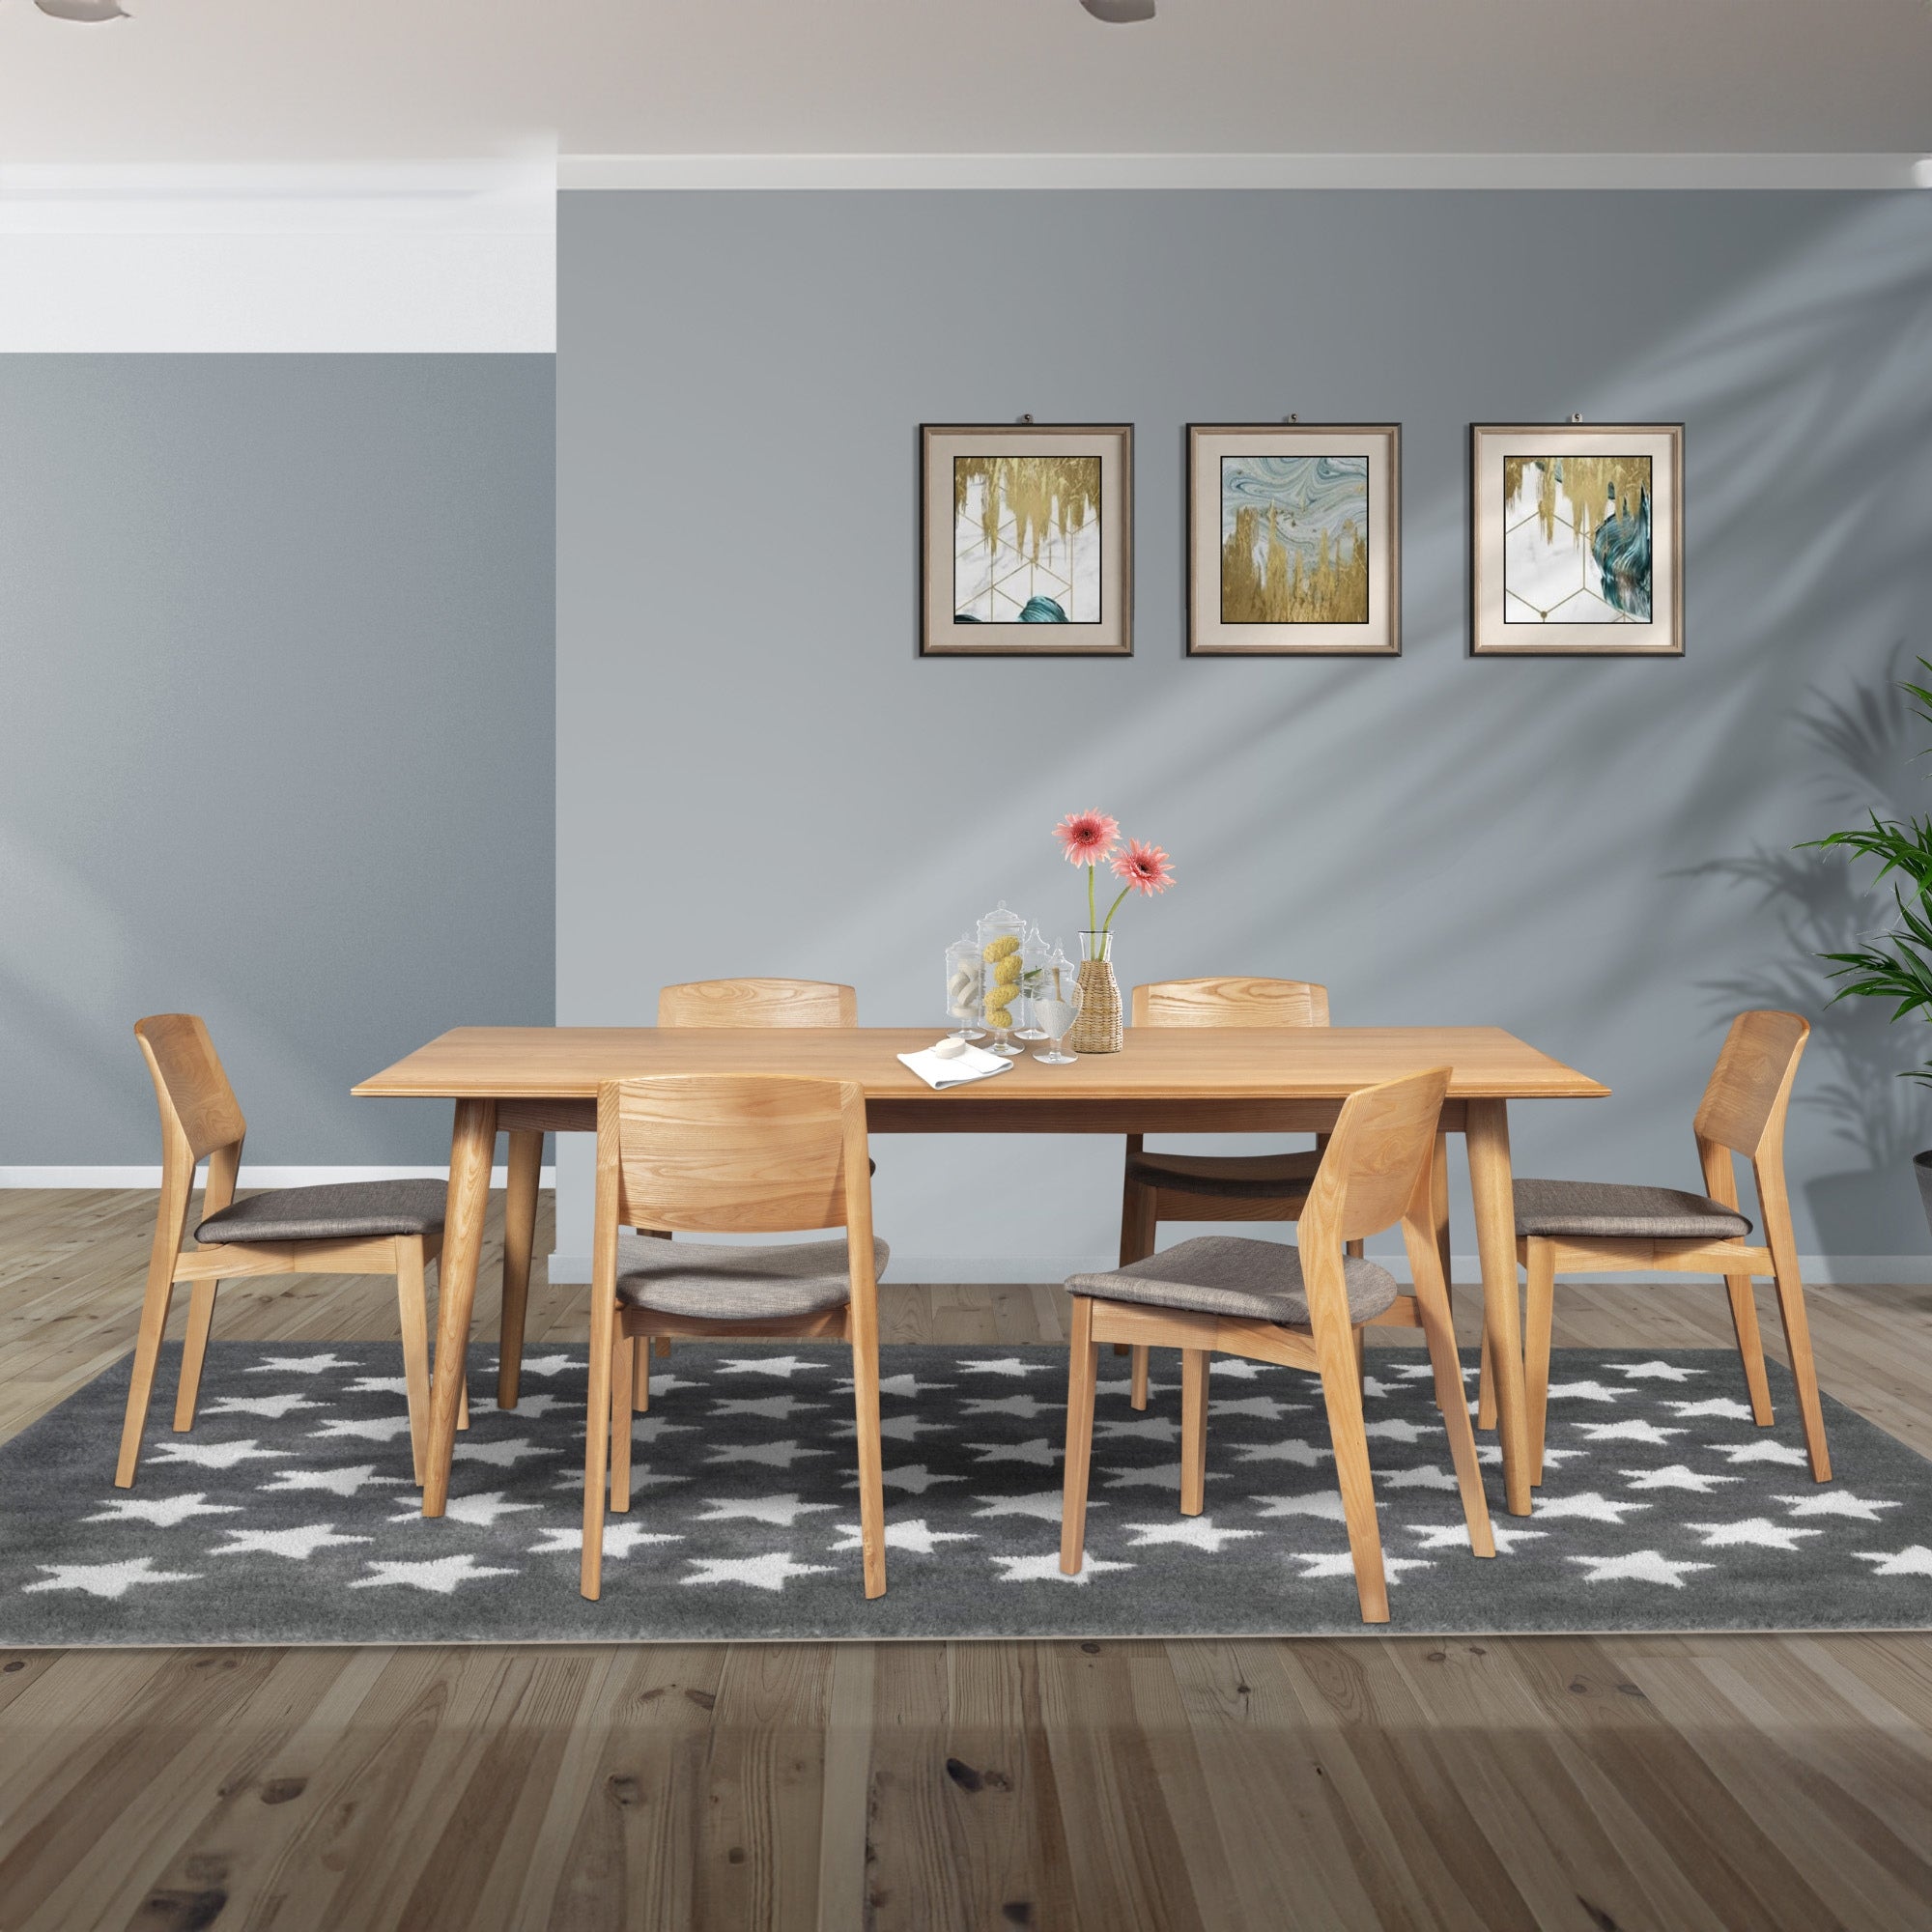 7pc Solid Ash Wood Dining Table Set, 180cm, Light Grey Fabric Chairs